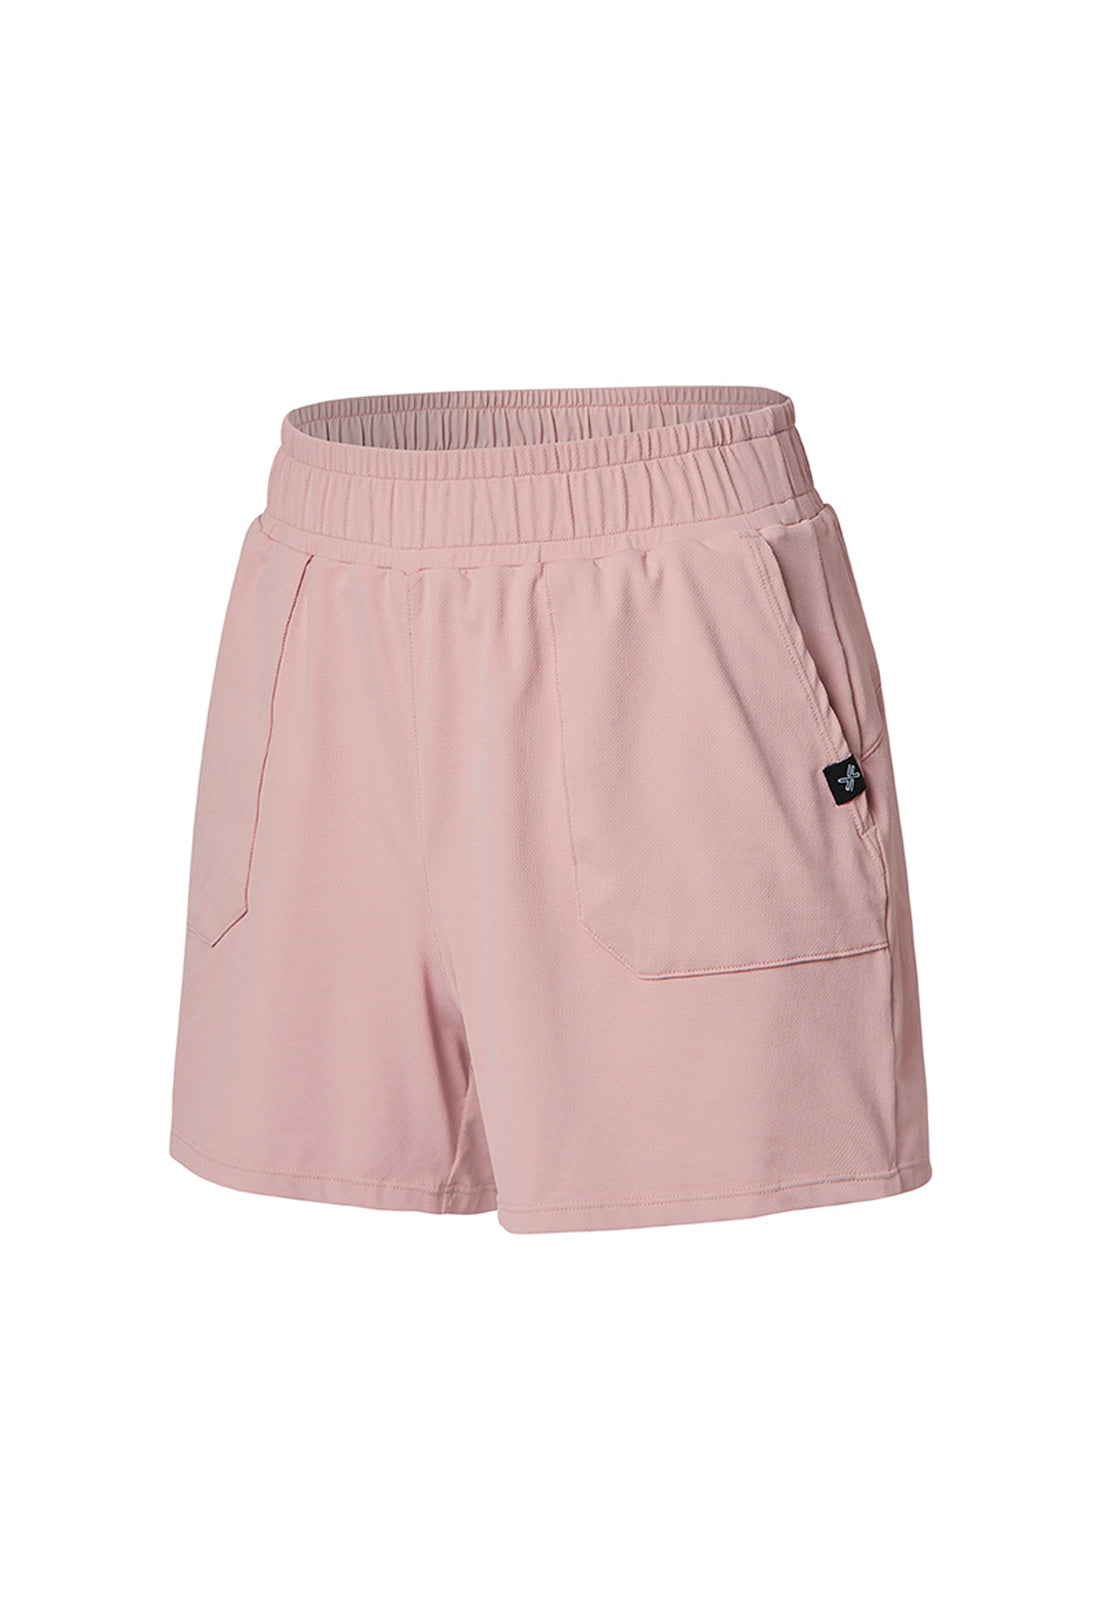 Cooling Mesh Out Pocket Shorts - Cream Pink